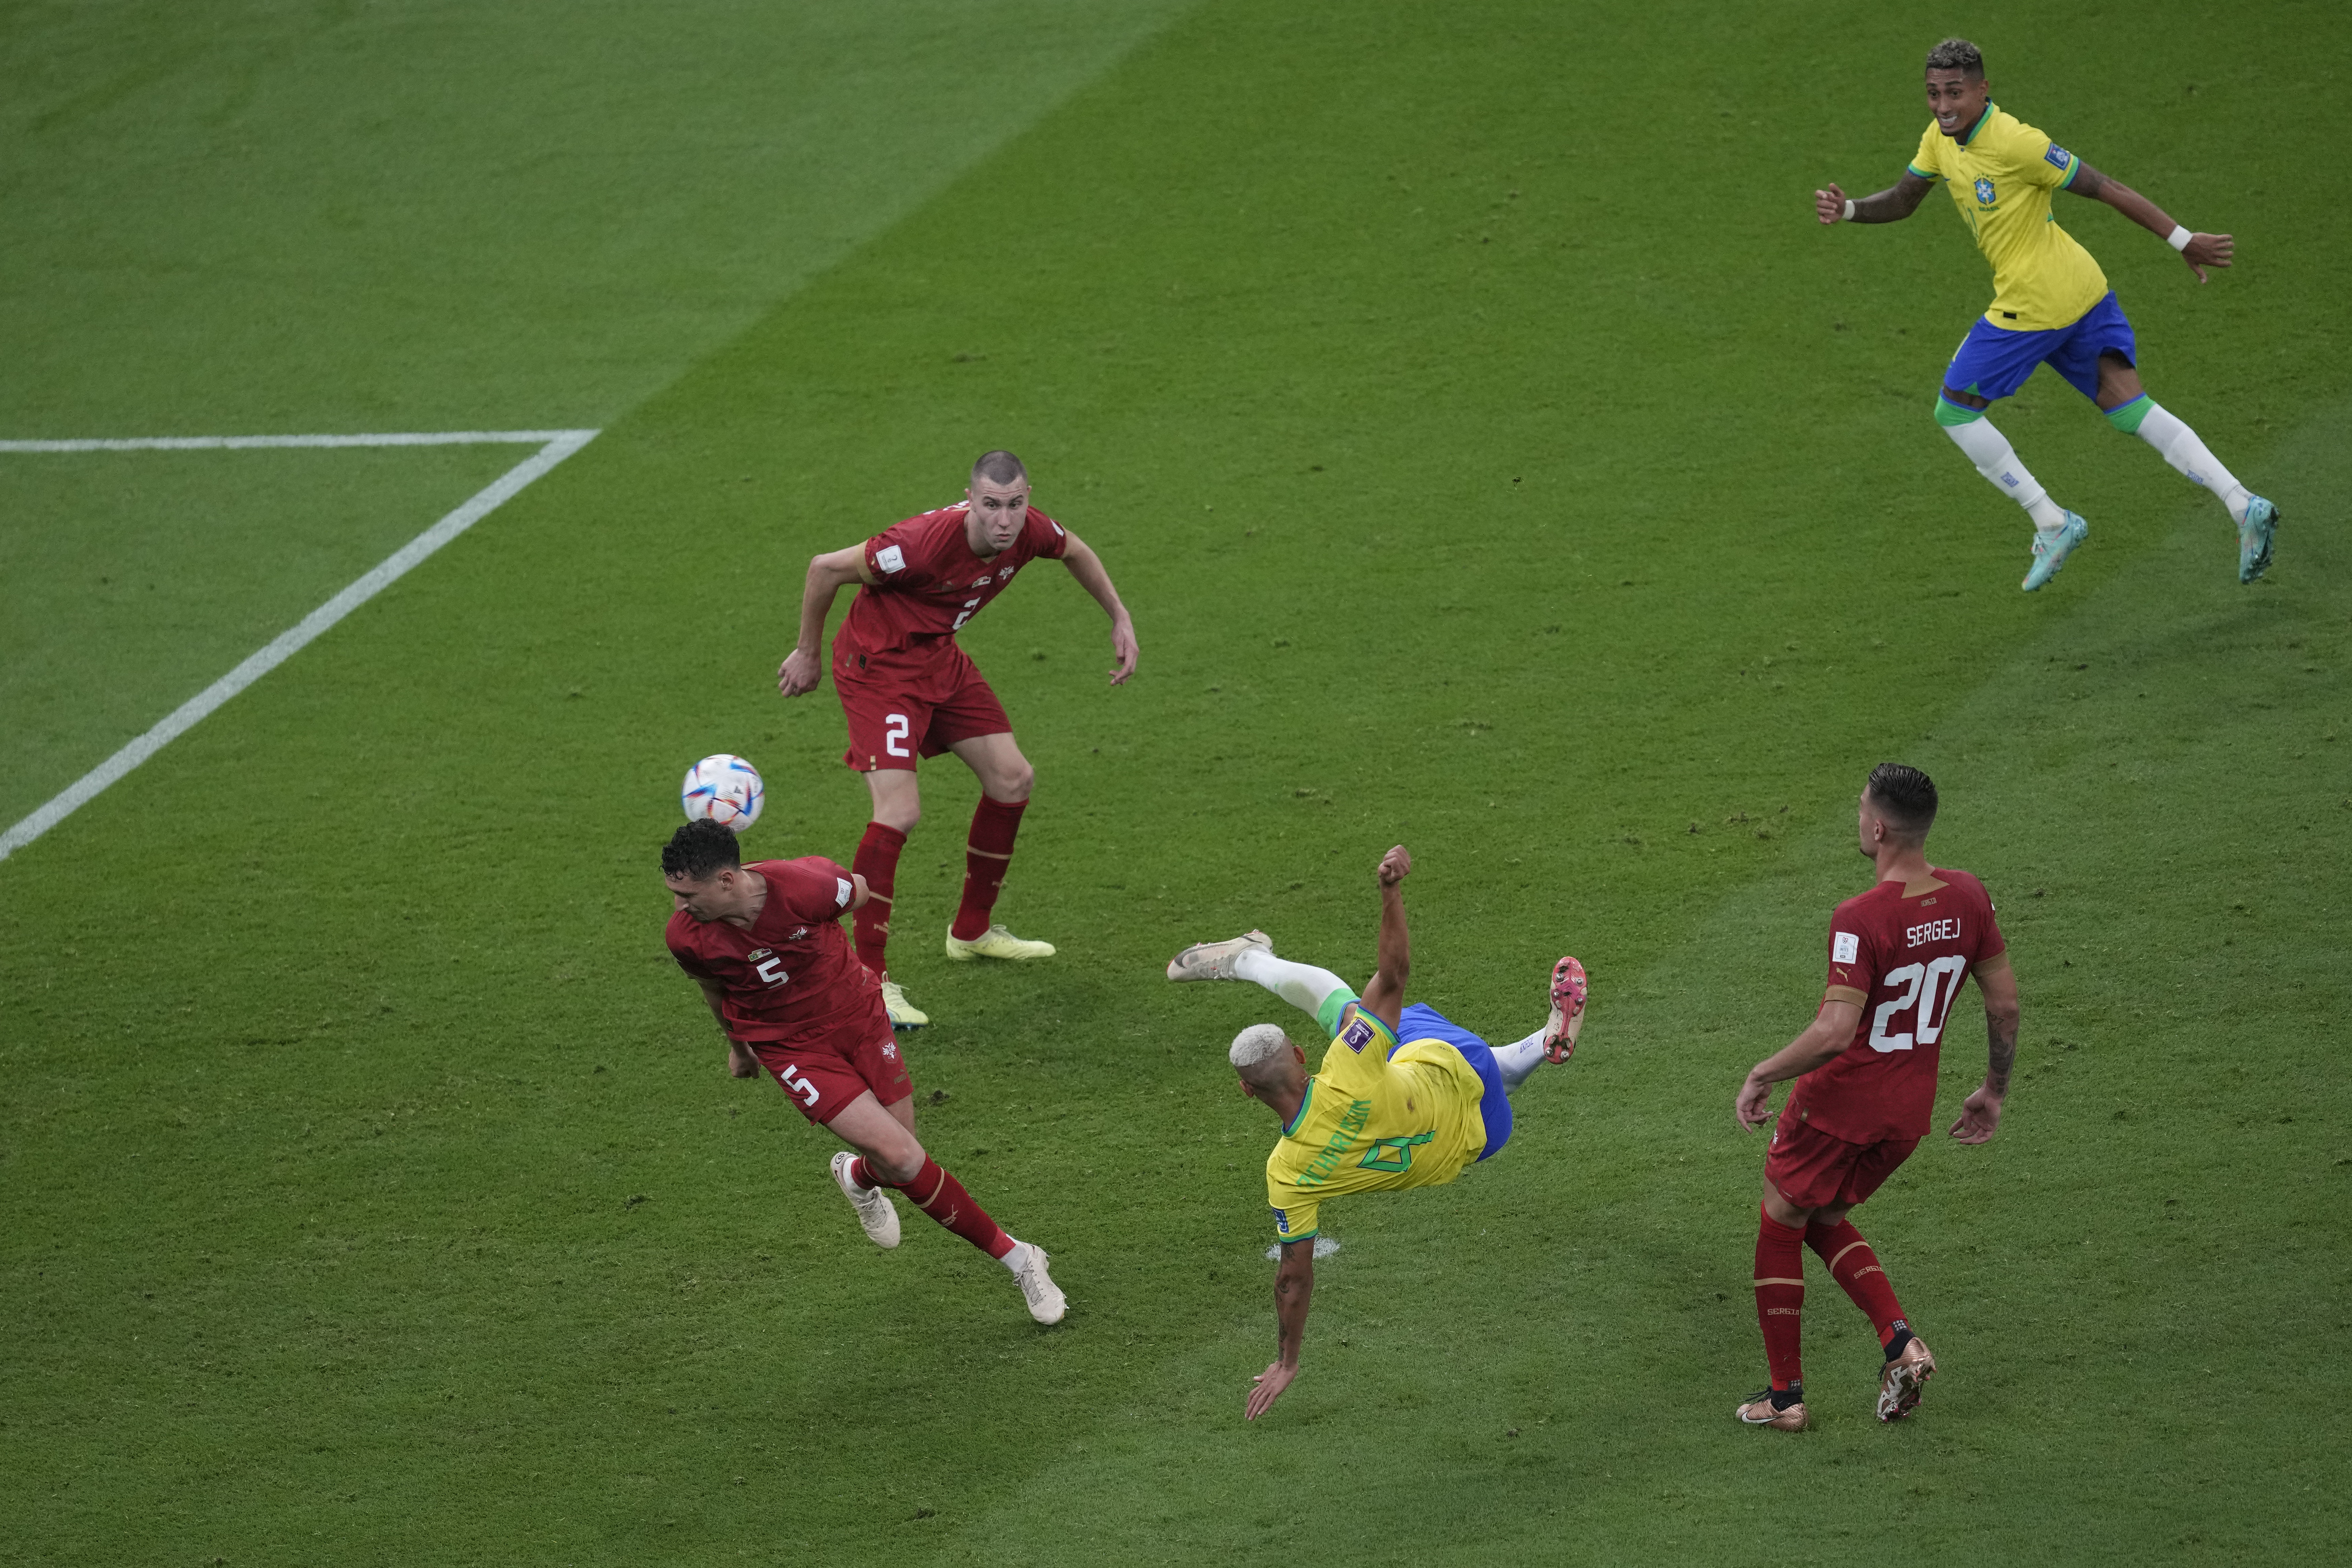 World 2022 roundup: Richarlison's golazo highlights best of group stage opening games